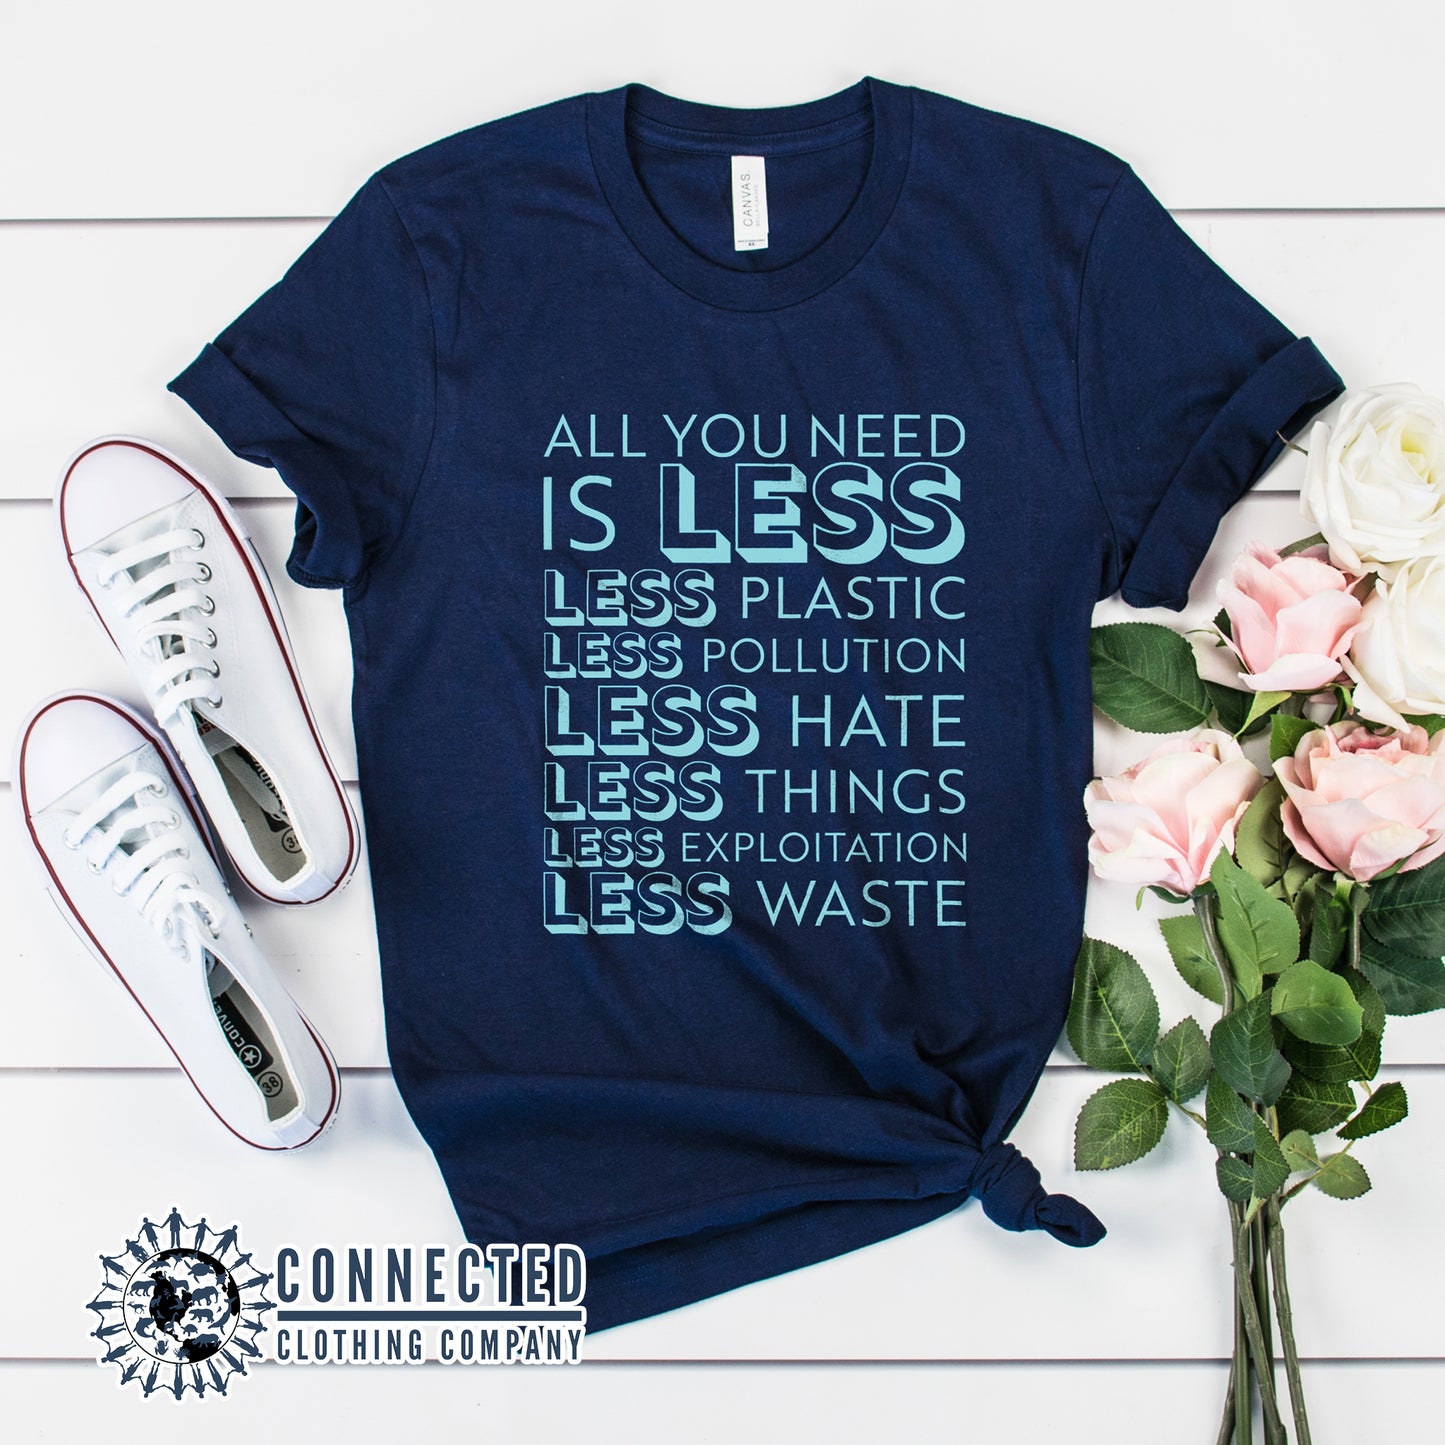 Navy Blue All You Need Is Less Short-Sleeve Unisex Tee reads "all you need is less. less plastic. less pollution. less hate. less things. less exploitation. less waste." - Connected Clothing Company - Ethically and Sustainably Made - 10% of profits donated to Mission Blue ocean conservation